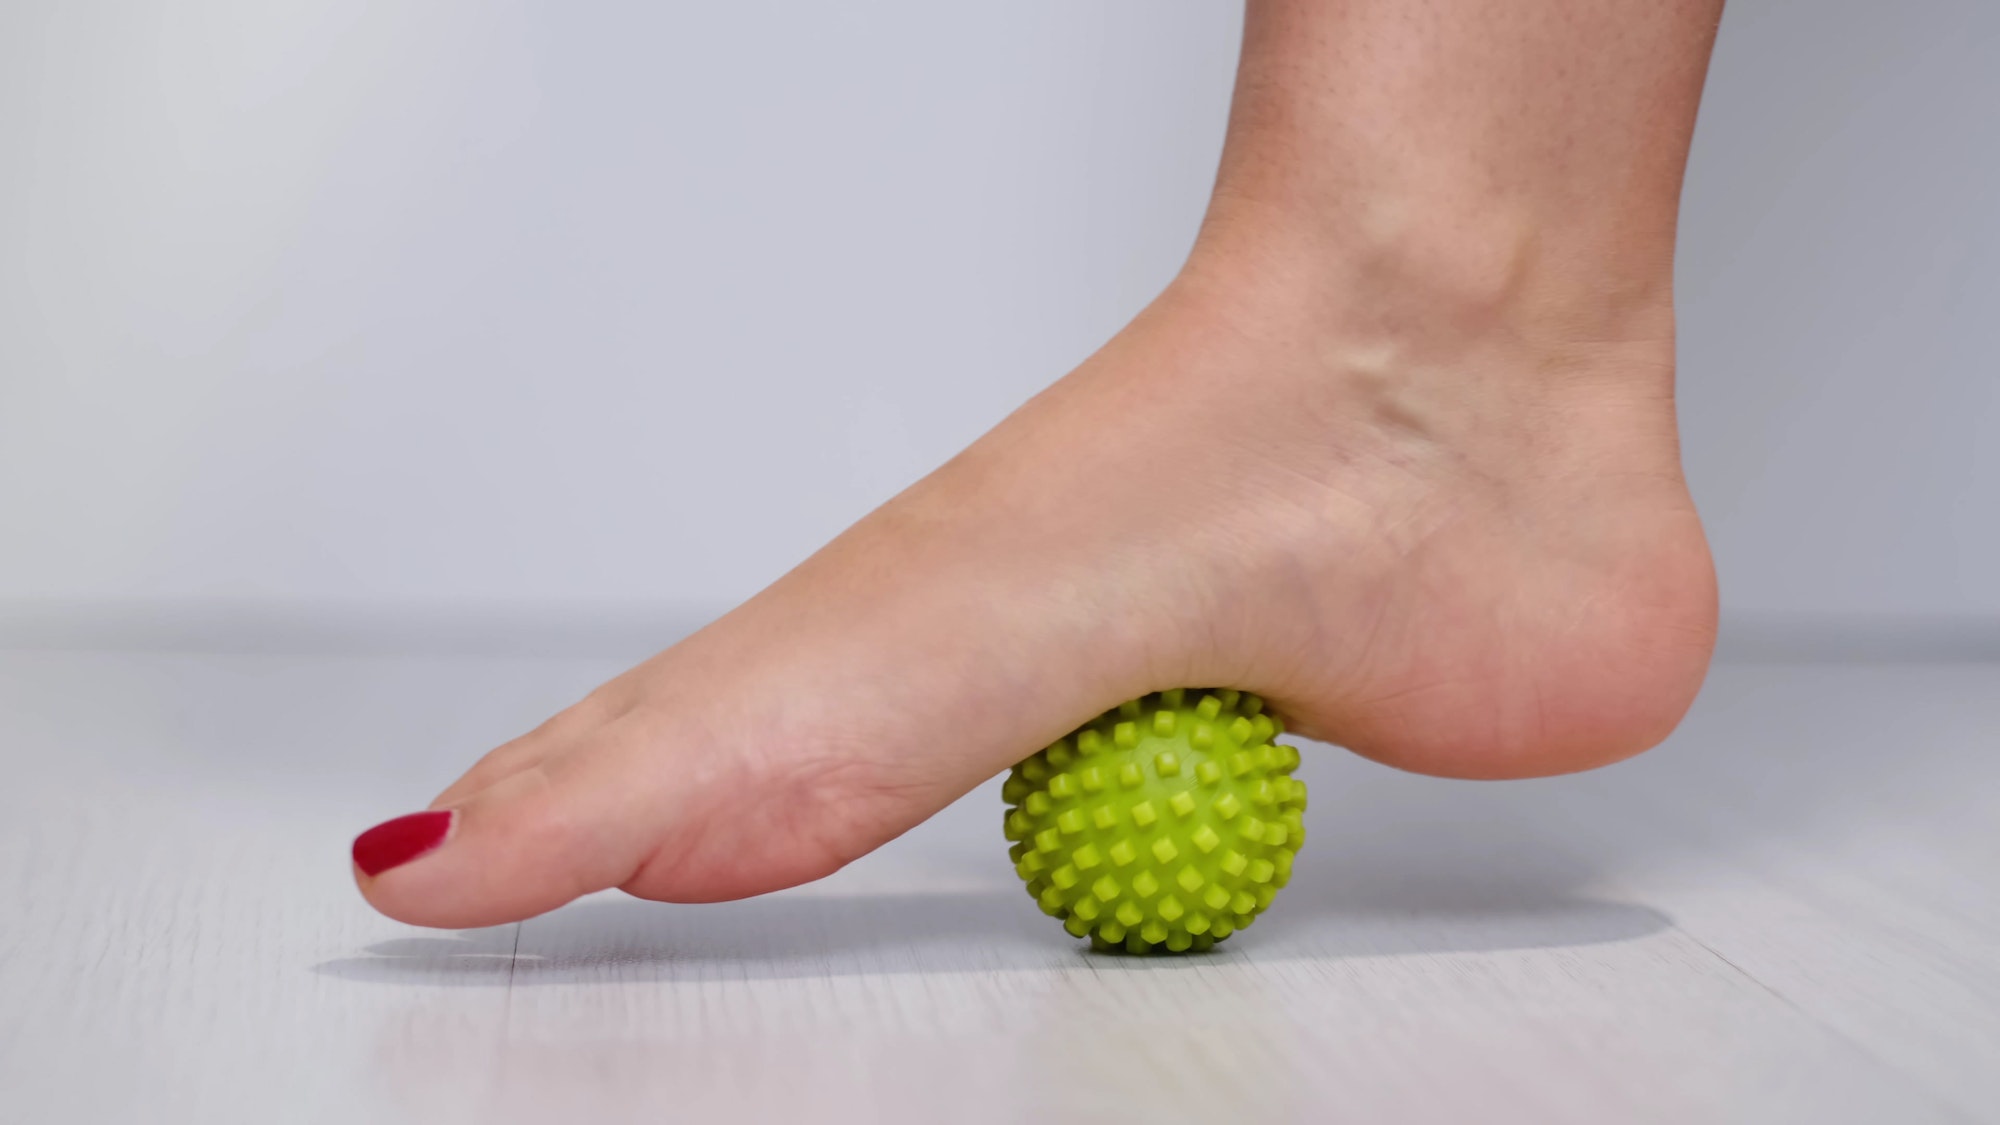 foot step on massage ball to relieve Plantar fasciitis or heel pain. woman with red